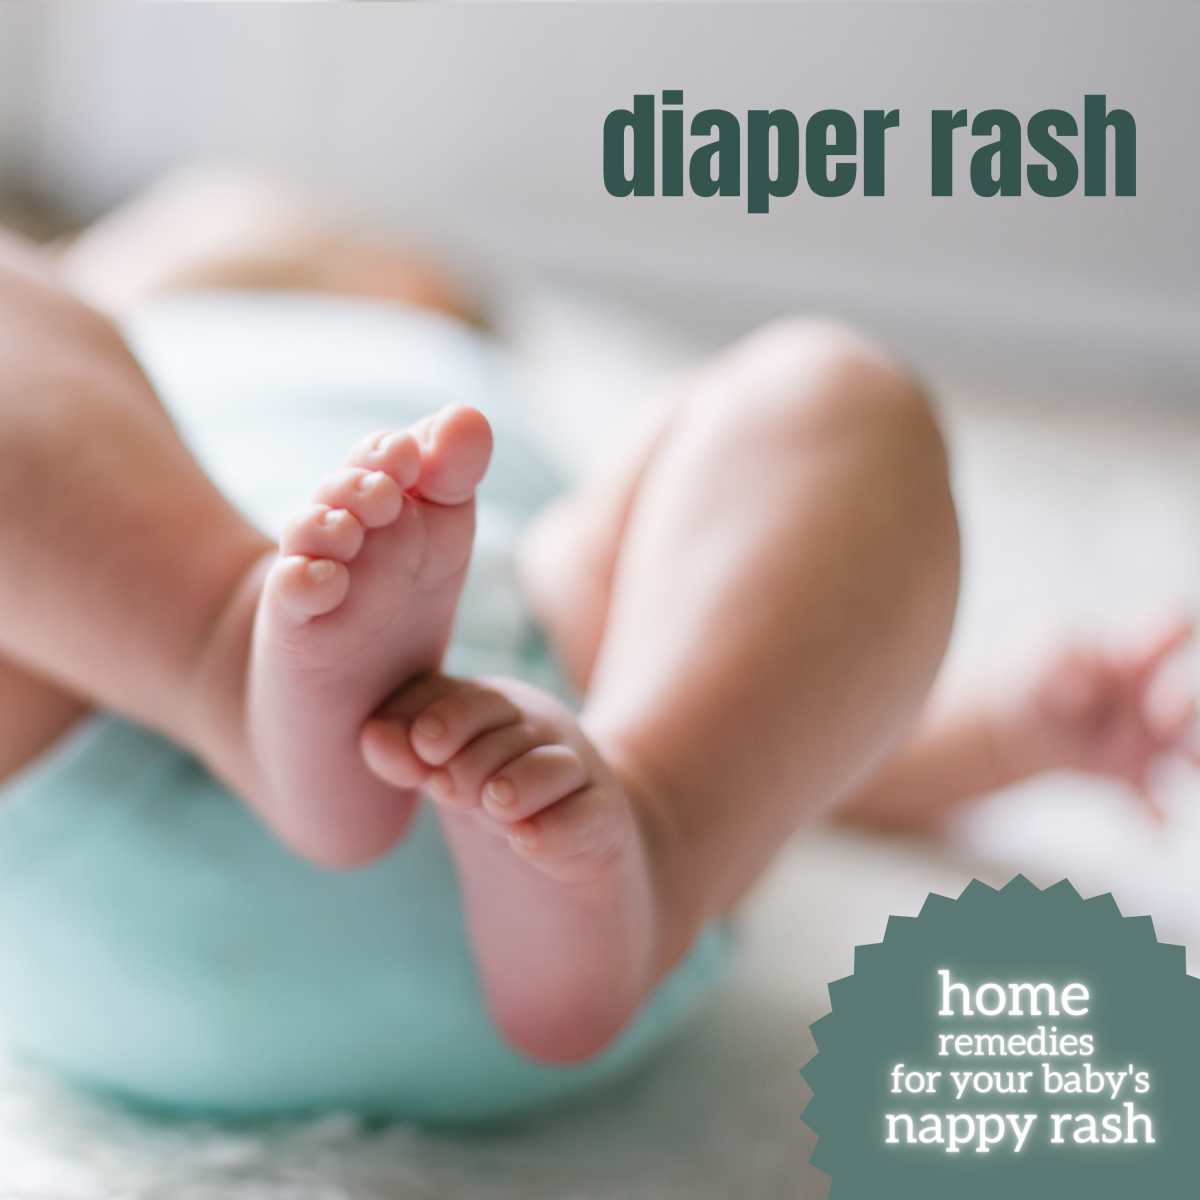 The best home remedies for diaper rash that are tried, tested, and proven to work quickly and safely to relieve baby's discomfort.